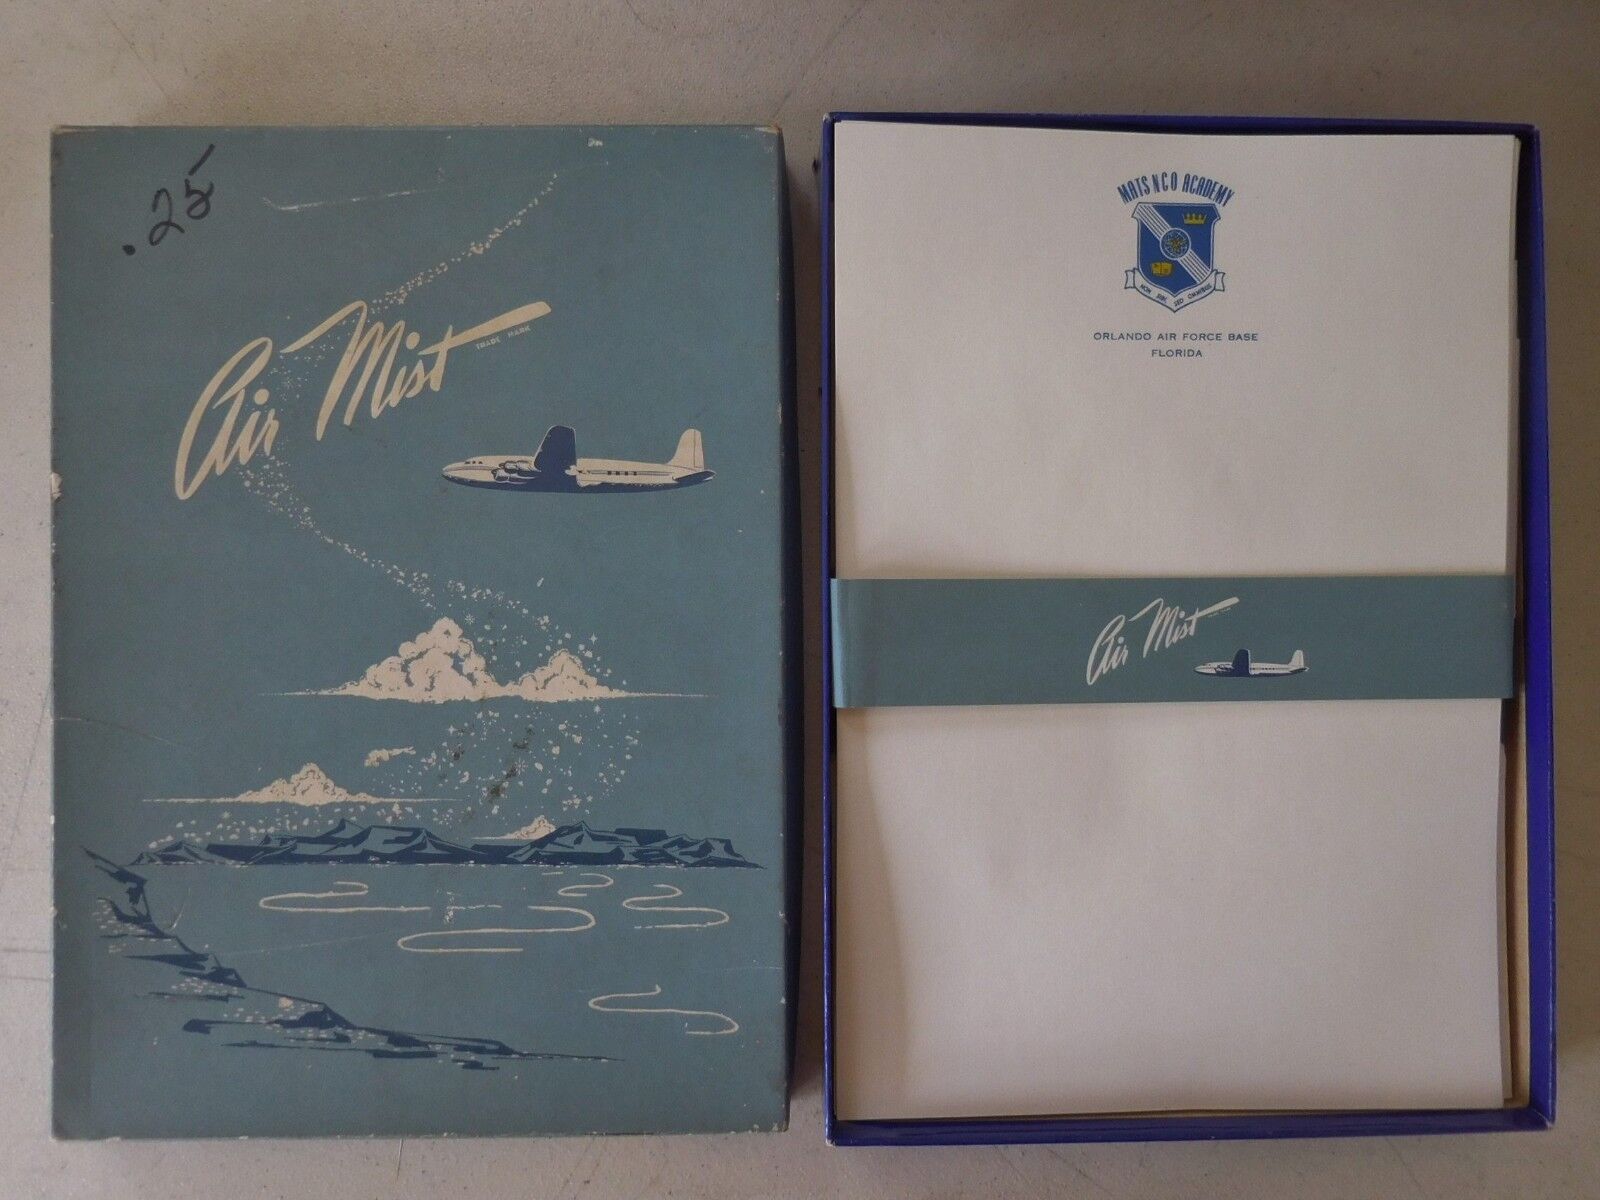 Orlando Air Force Base MATS N CO Academy Air Mist Box Of Stationery 1950s?